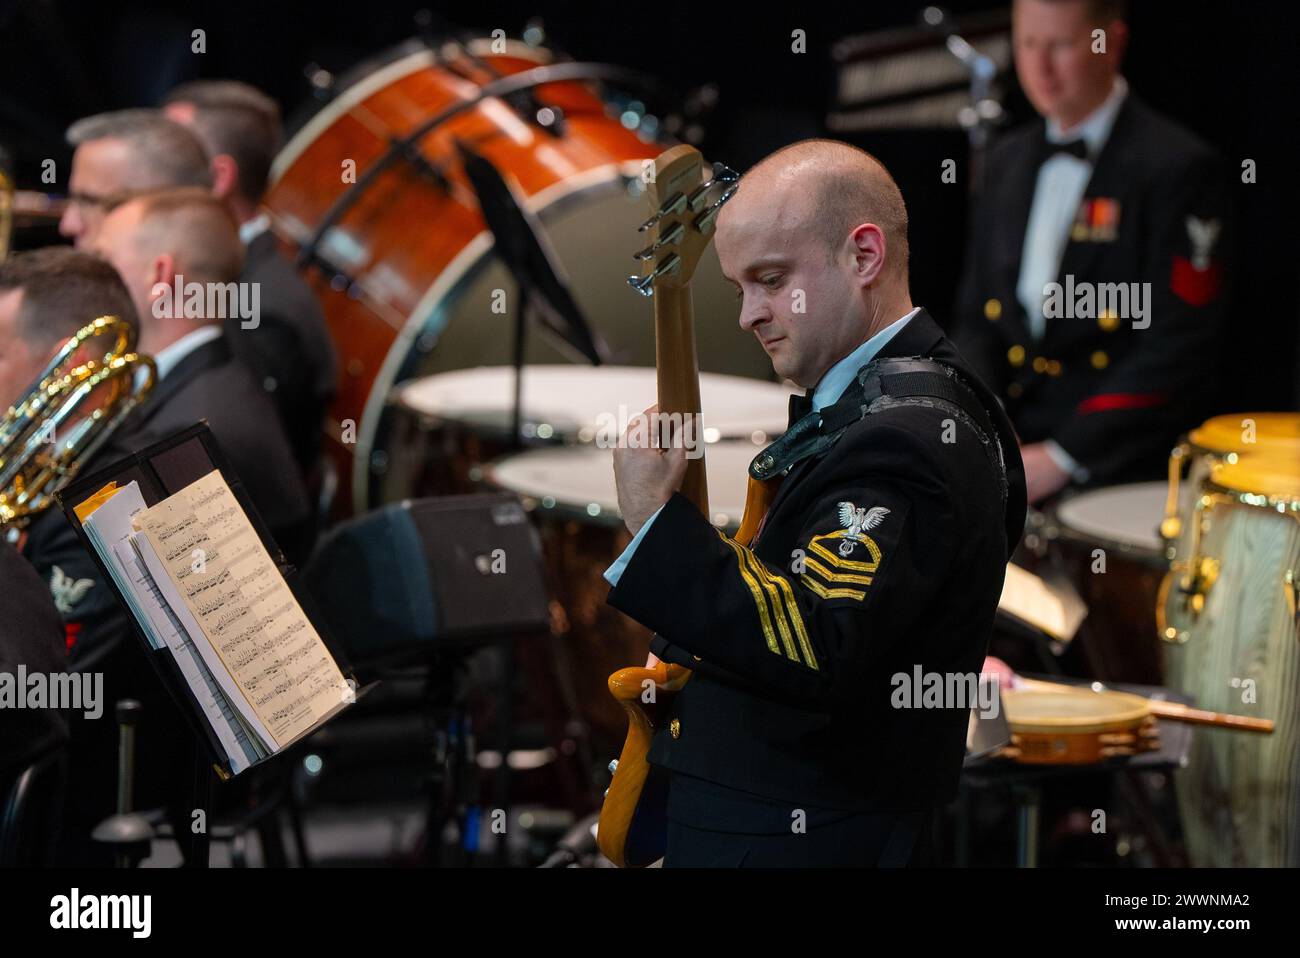 240205-N-PN185-1017 - Austin, Texas (Feb. 5, 2024) - Chief Musician Kyle Augustine, from Woodbridge, Virginia, performs at the United States Navy Band 2024 national tour concert at Westlake Community Performing Arts Center.  The Navy Band will travel 2500 ground miles over 18 days to 7 states, giving 12 public concerts as well as 5 concerts for students in schools.  Navy Stock Photo